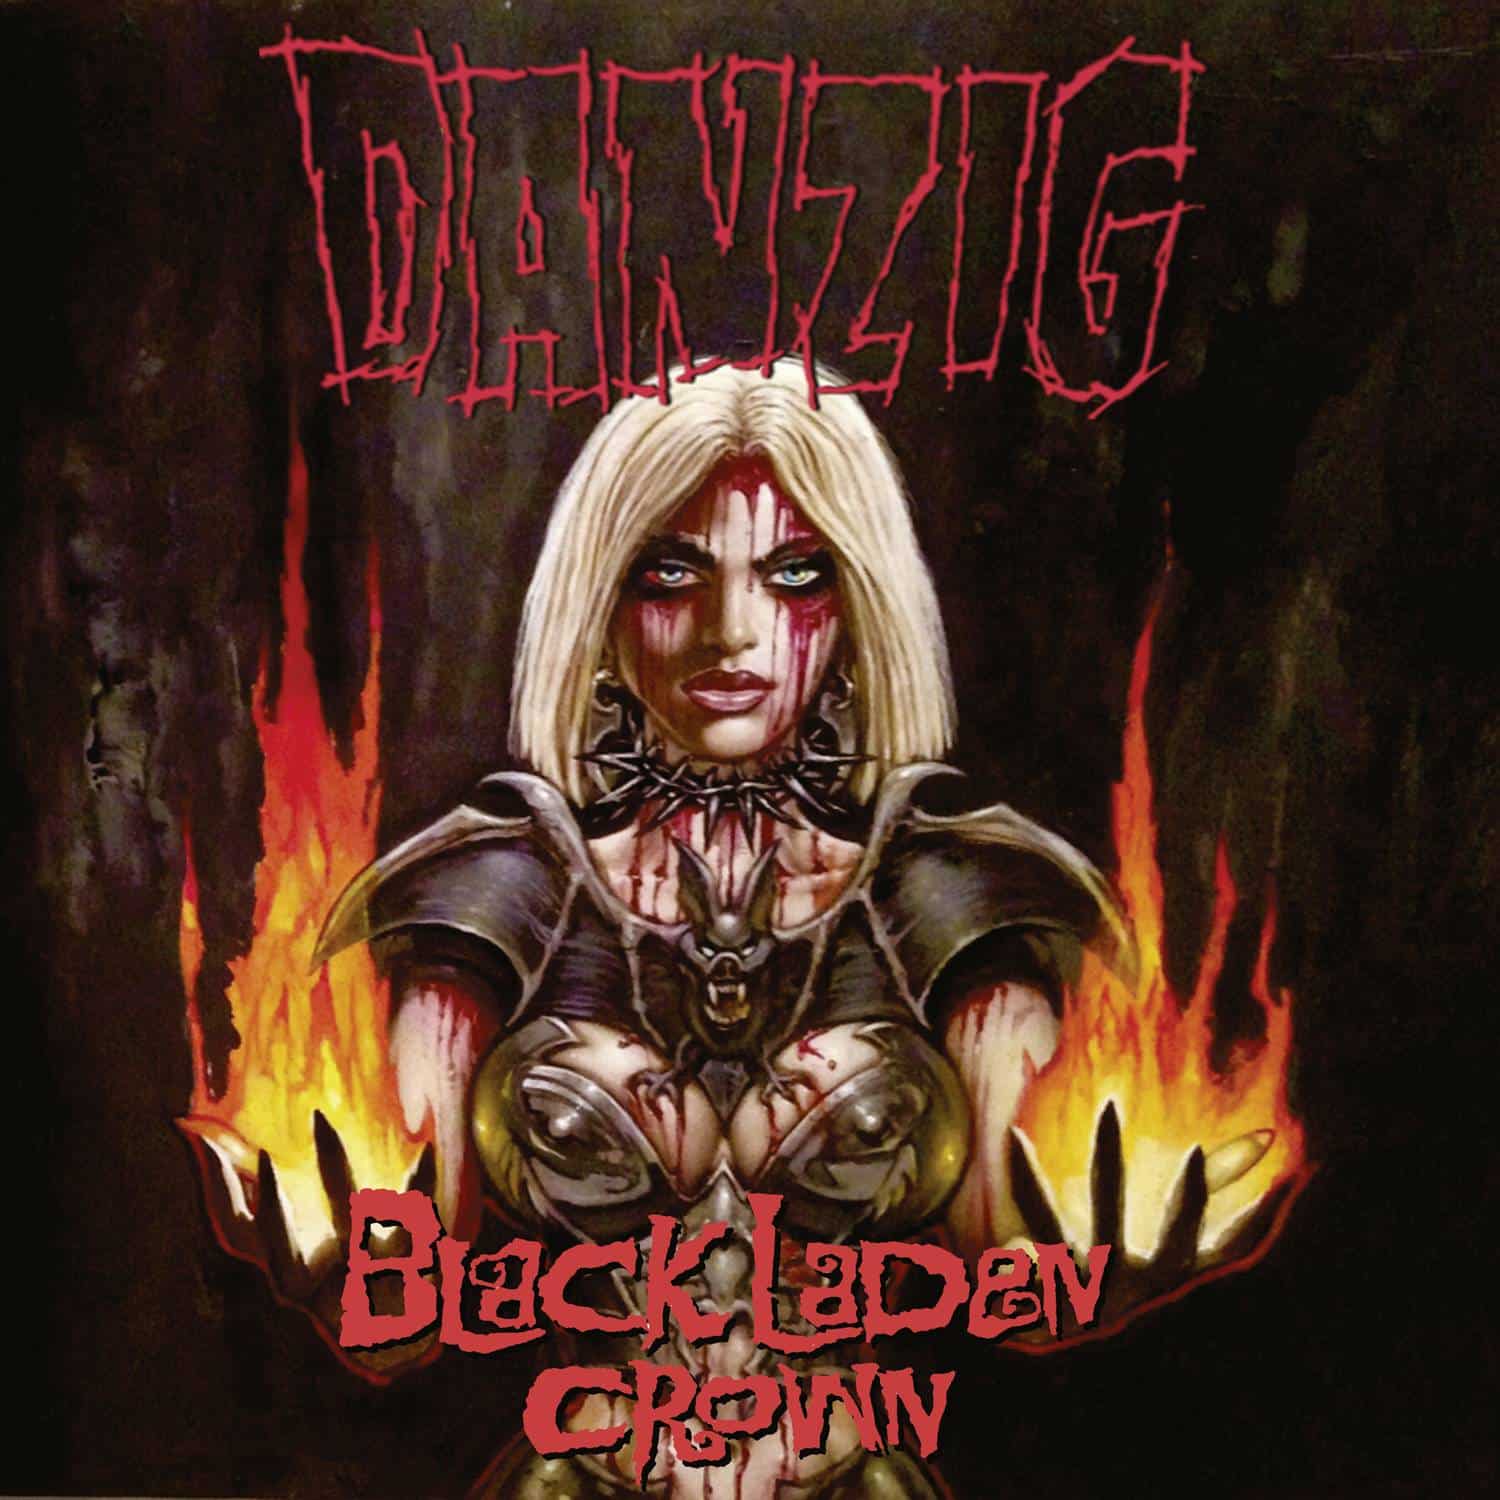 Danzig ; 'BLACK LADEN CROWN' CD & LP 26 May 2017 AFM Records Worldwide - Evilive Records via Nuclear Blast